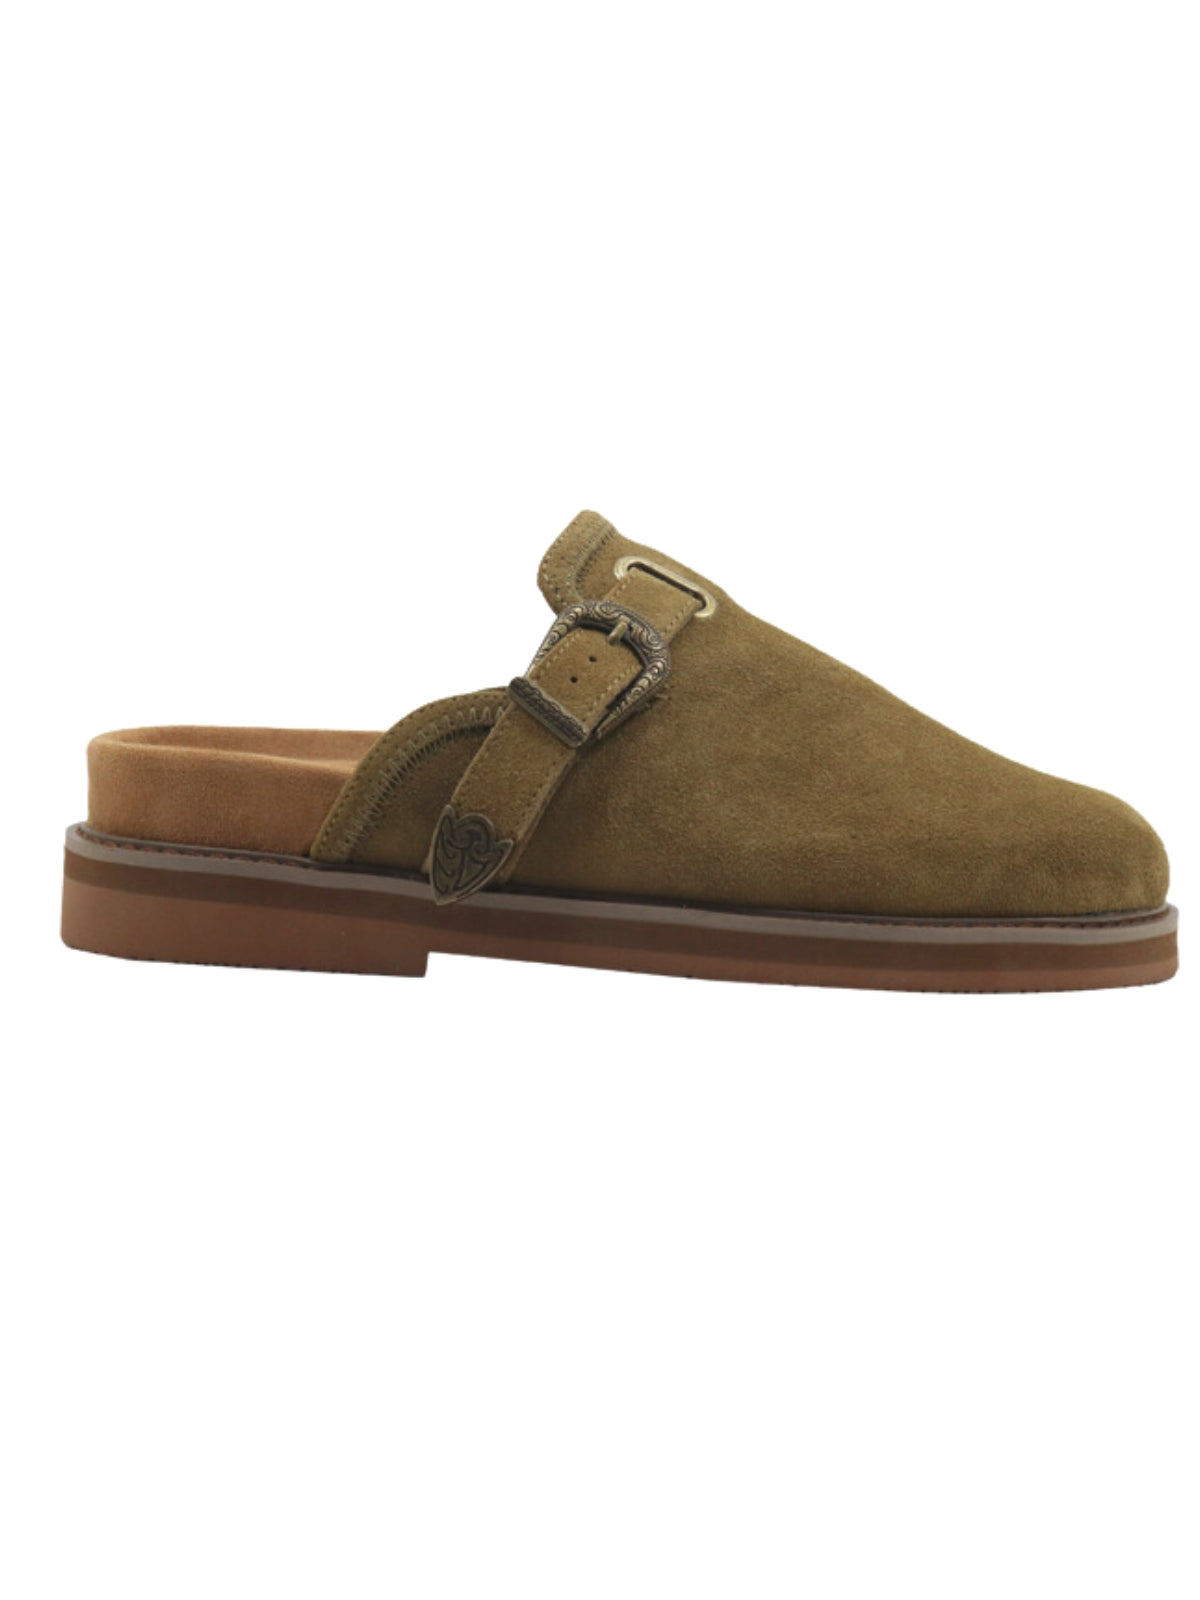 Jd Shoes Outlaw Moss